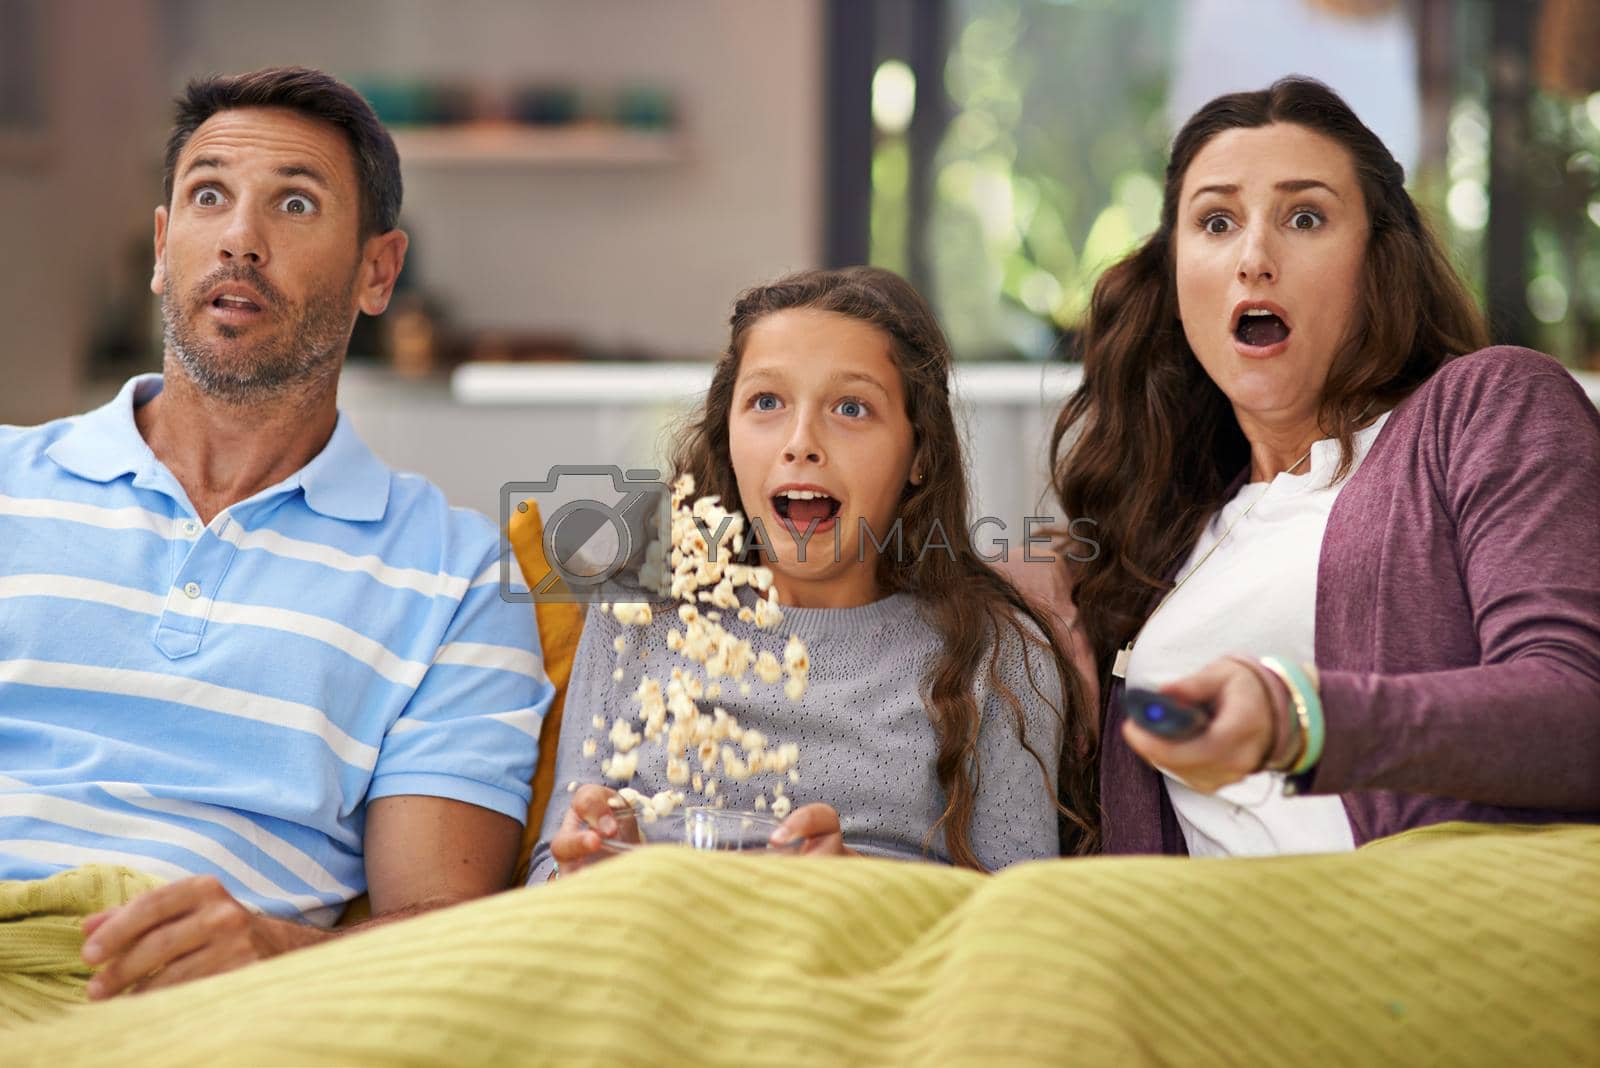 Royalty free image of They love scary movies. Shot of a family sitting on their living room sofa watching a movie and eating popcorn. by YuriArcurs